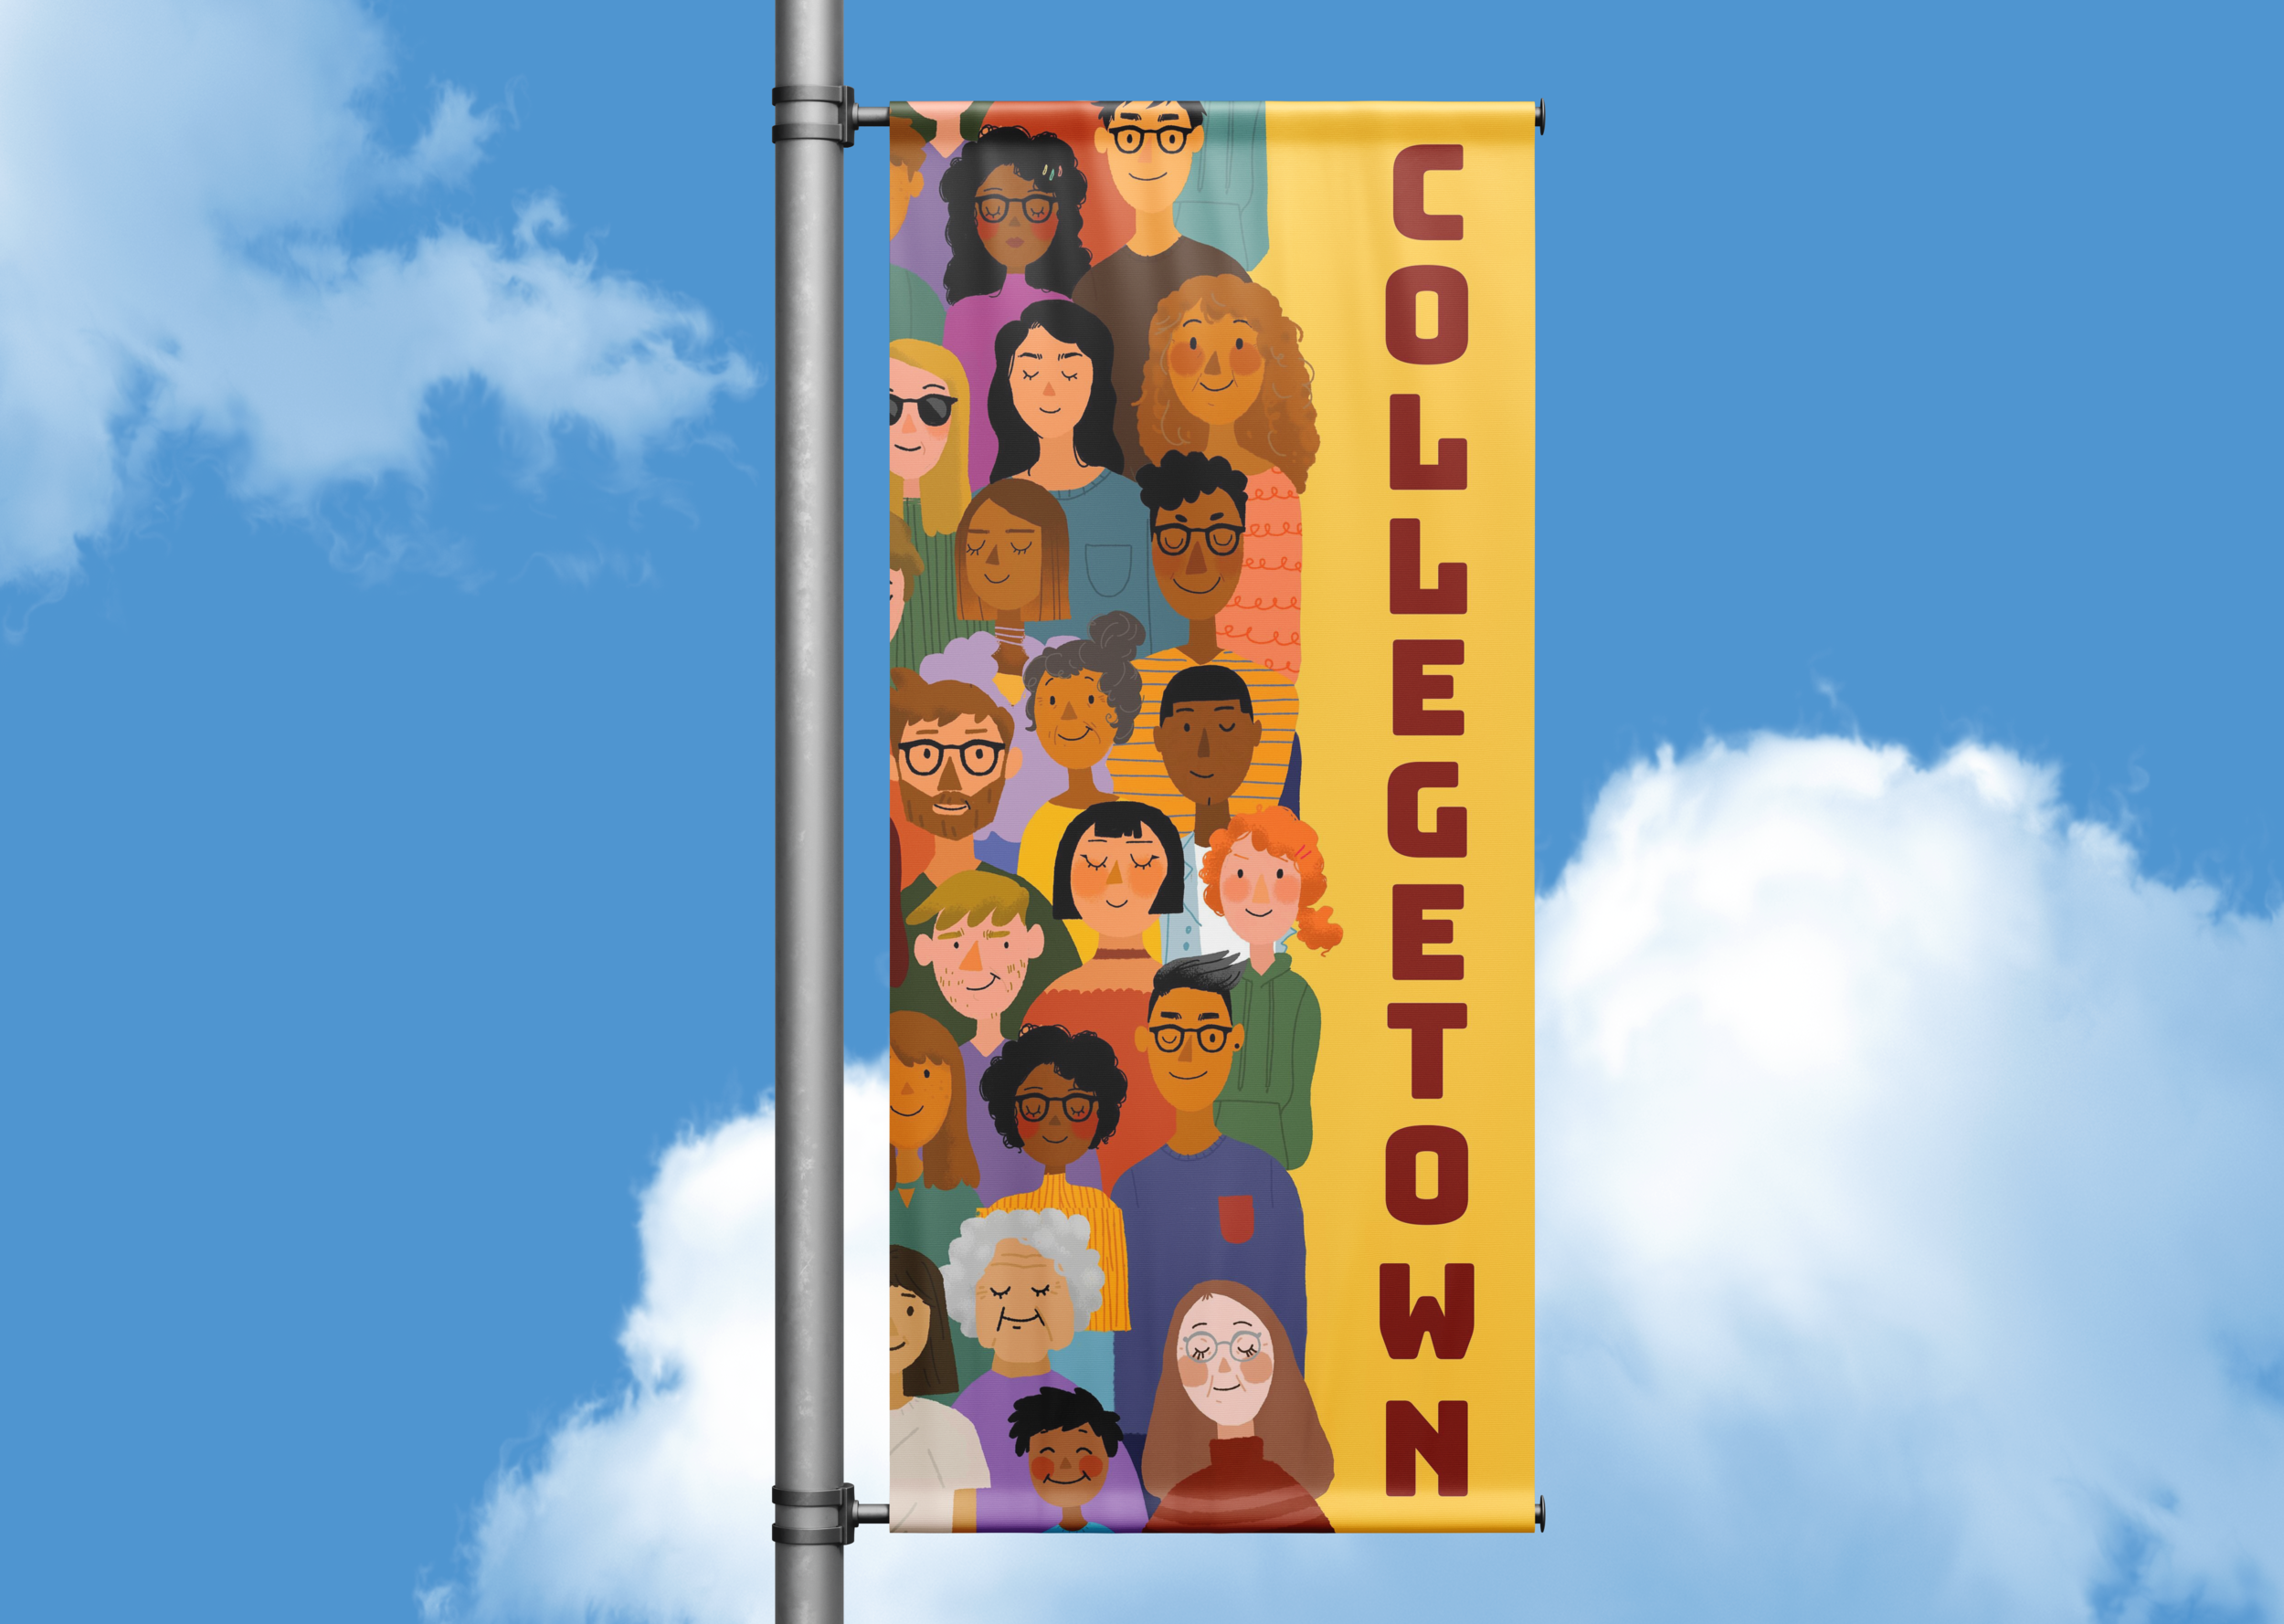 Ithaca Collegetown Official Banners. Graphic Design